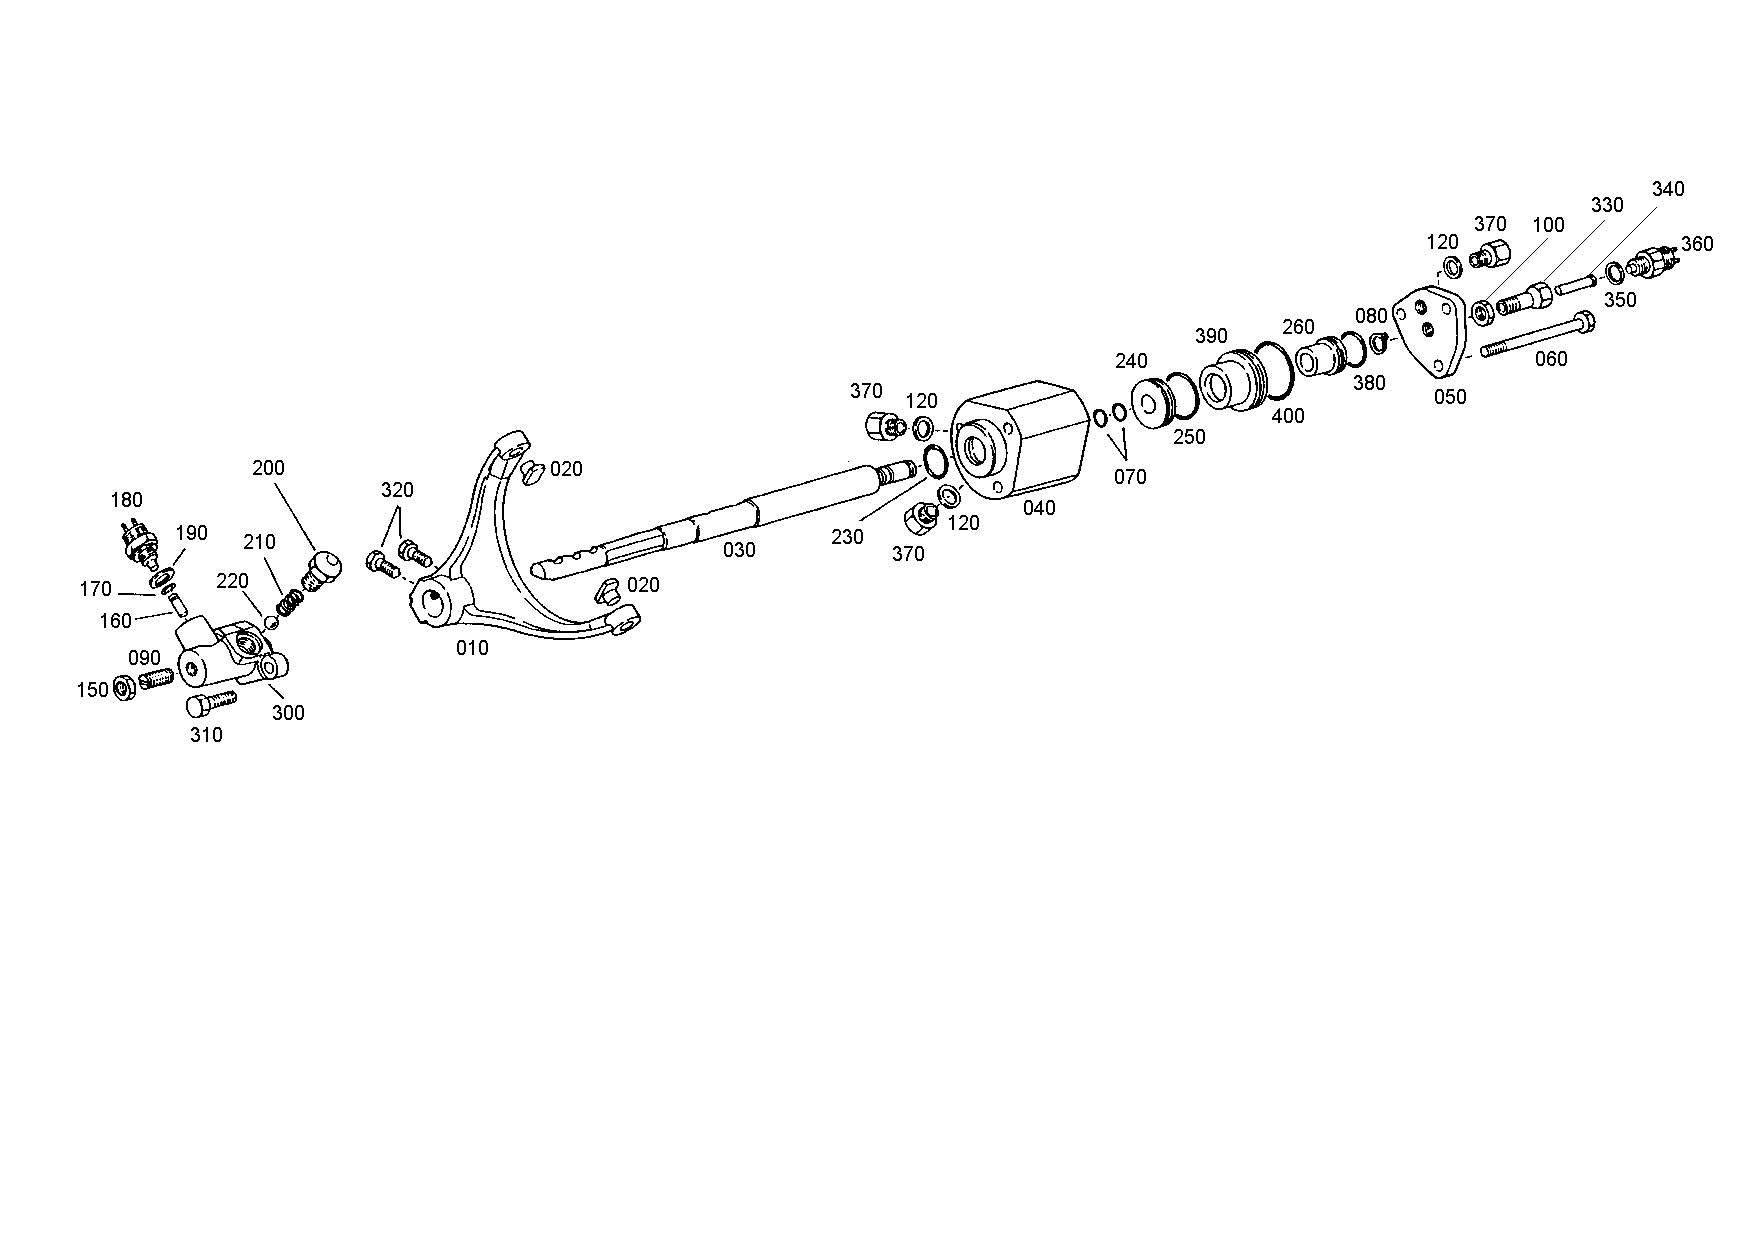 drawing for MARMON Herring MVG202056 - SHIFTER ROD (figure 4)